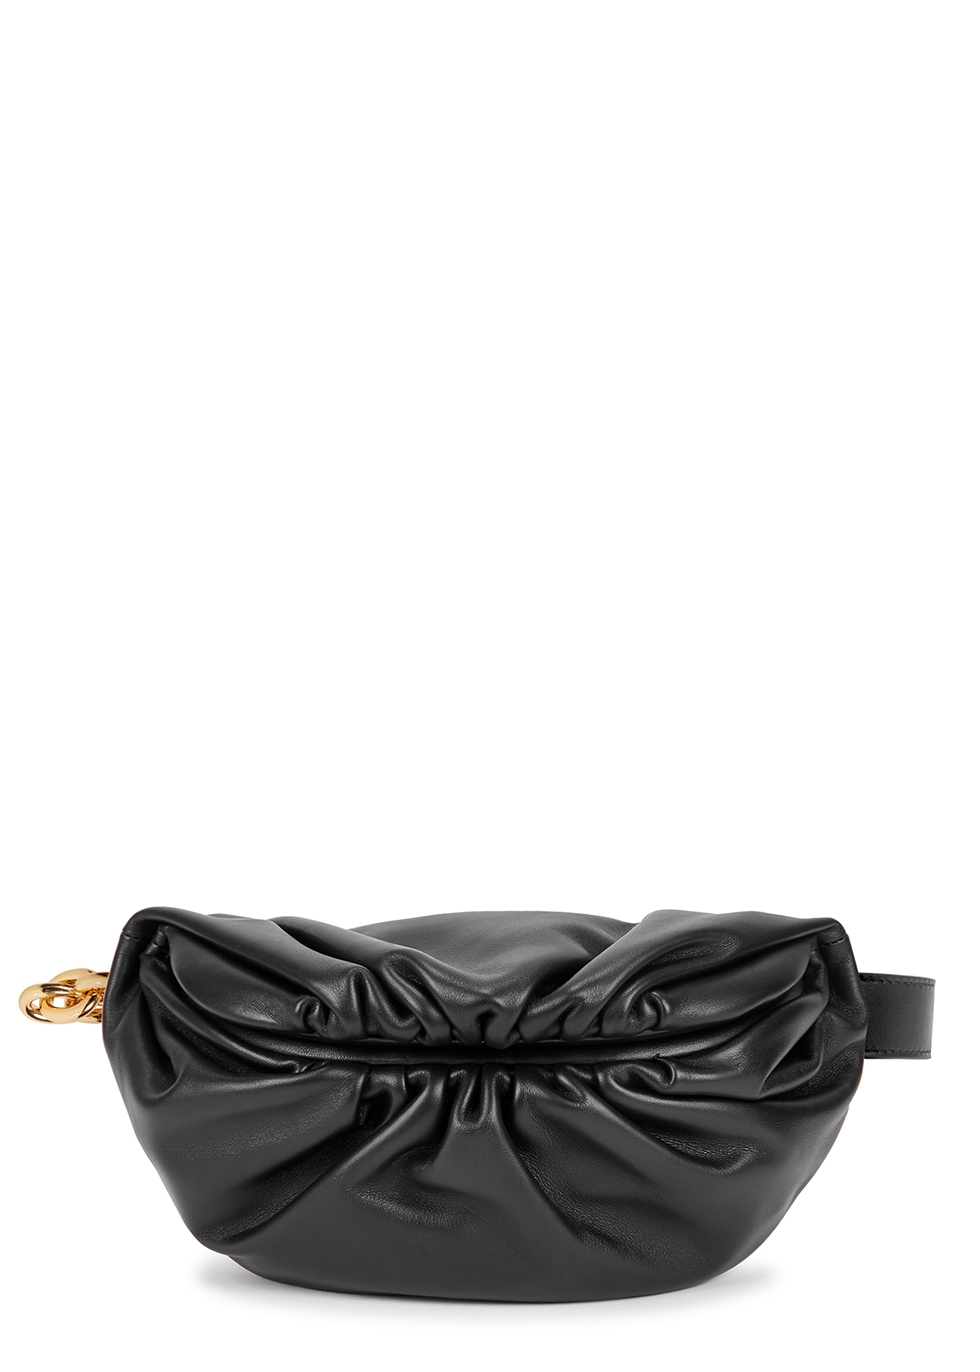 The Chain Pouch black leather belt bag